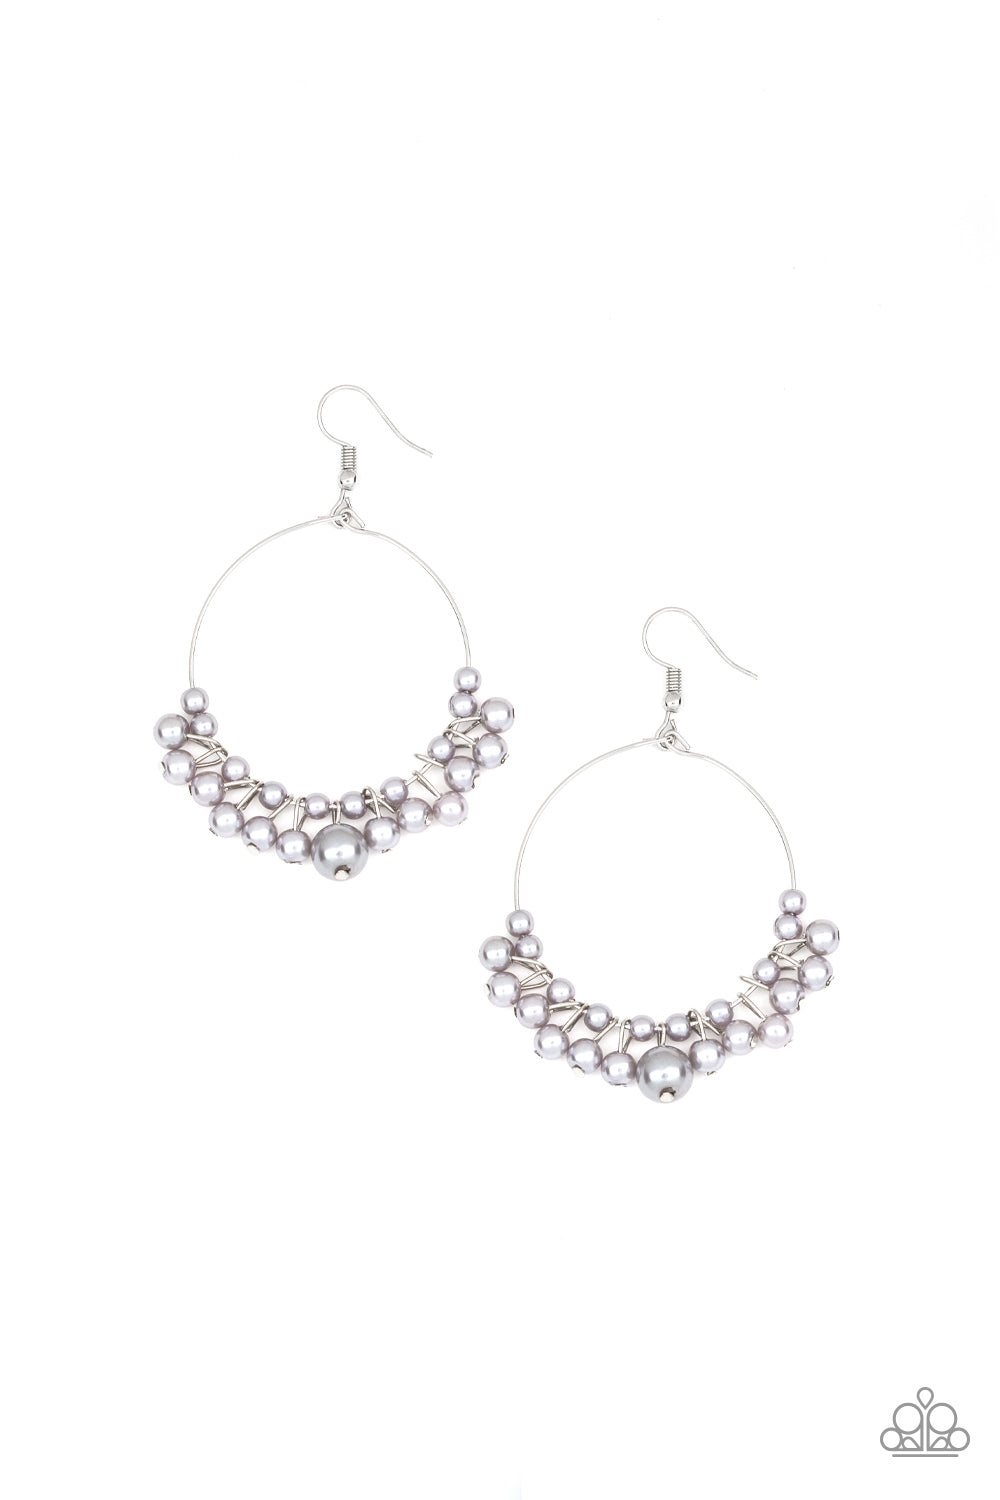 The PEARL-fectionist - Silver earrings